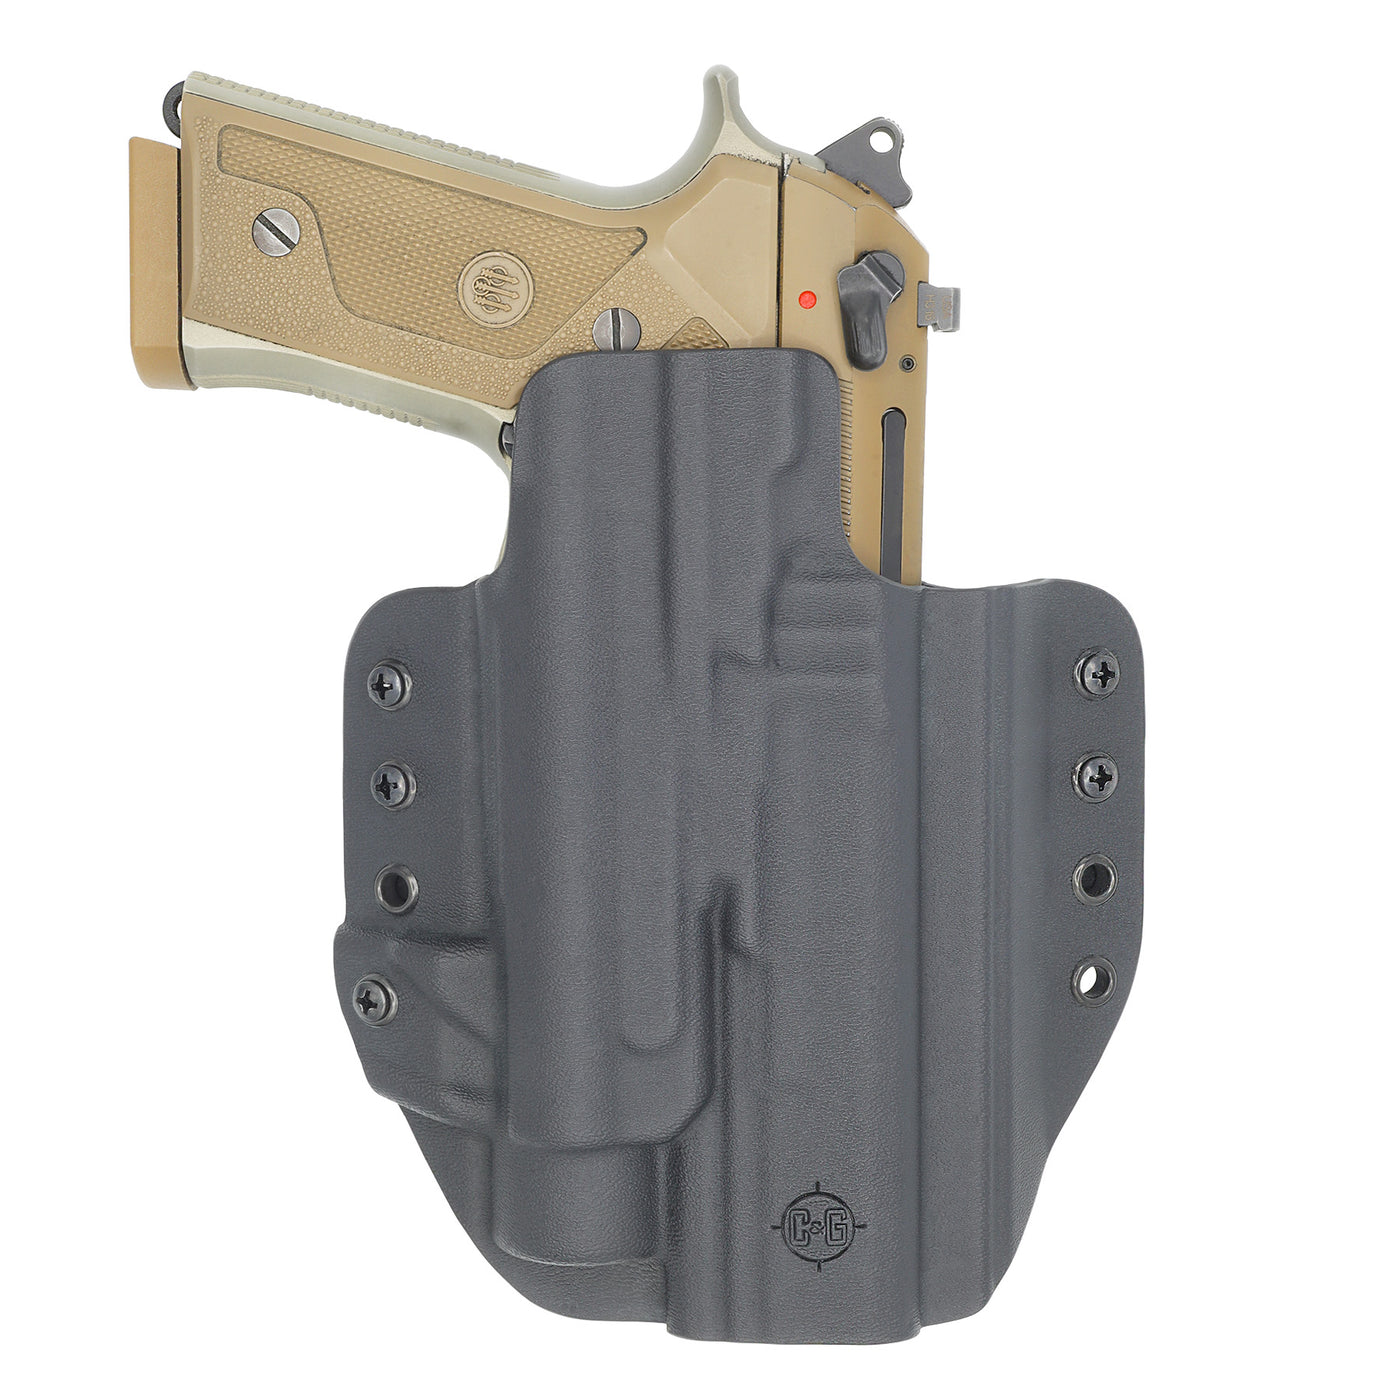 C&G Holsters custom OWB Tactical Beretta Streamlight TLR-1 in holstered position